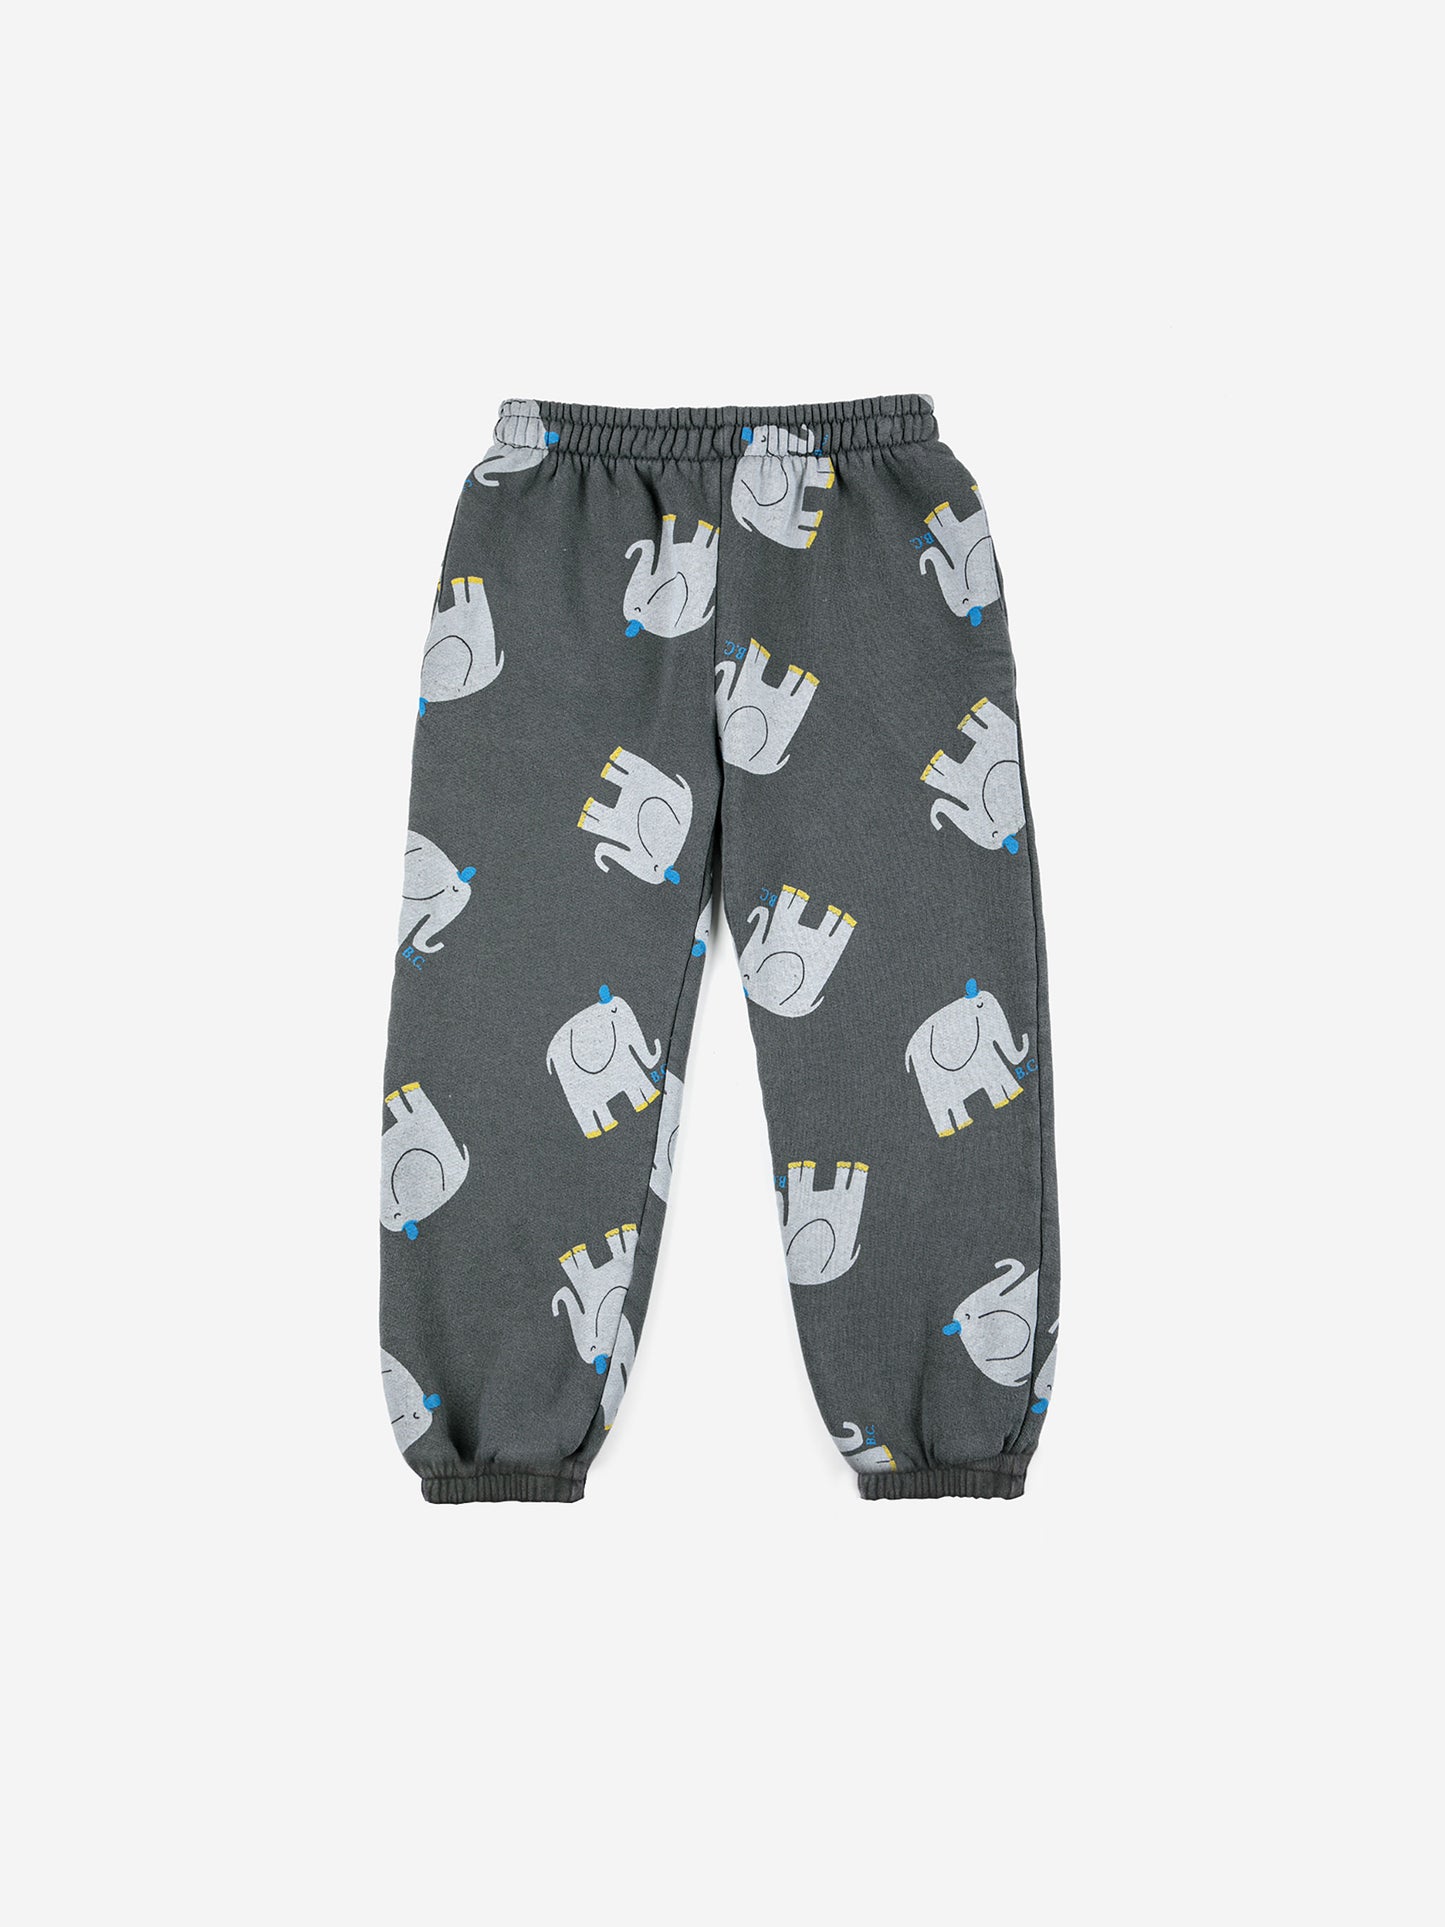 The Elephant all over jogging pants